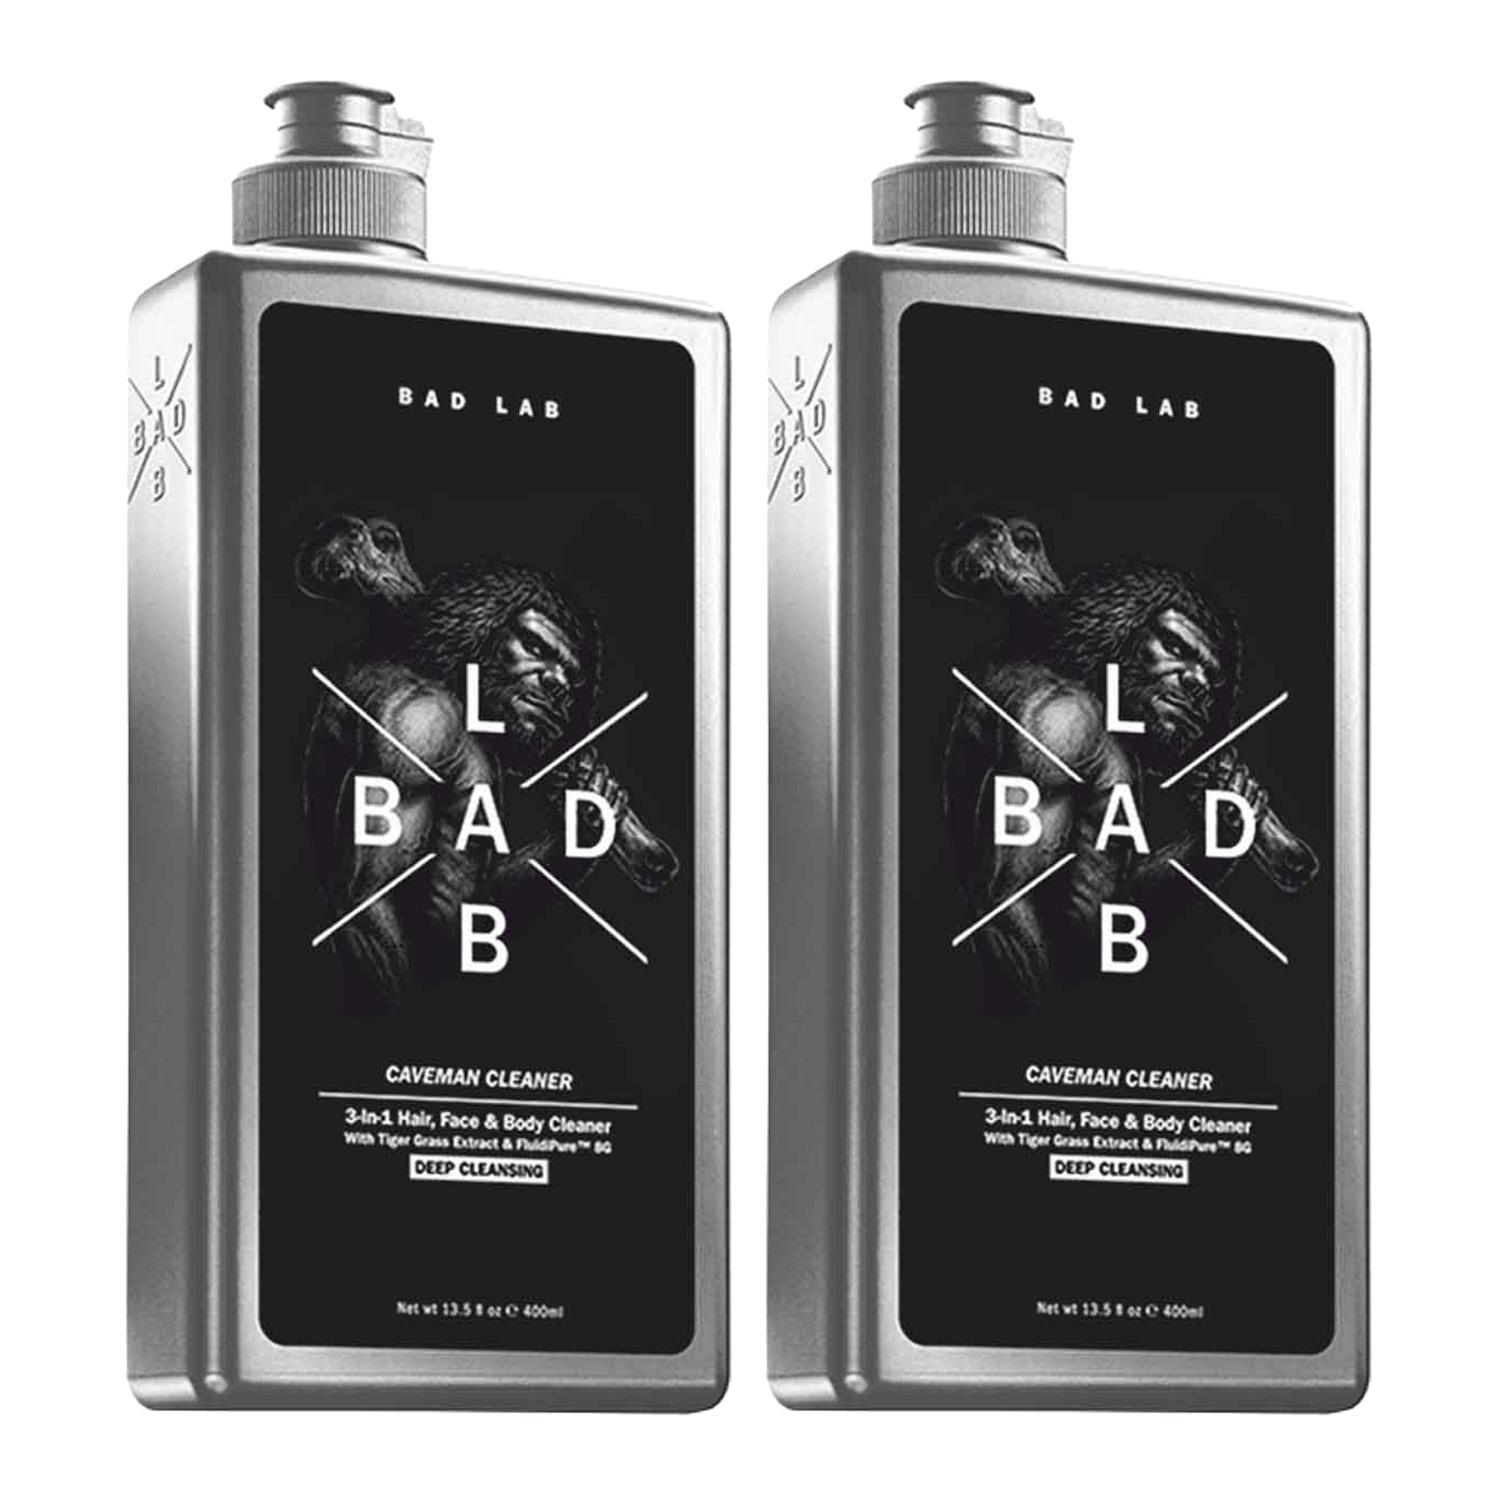 Bad Lab | Bad Lab Caveman Cleaner 3-In-1 Hair, Face, Body Cleaner Deep Cleansing (400 ml) (Pack Of 2)